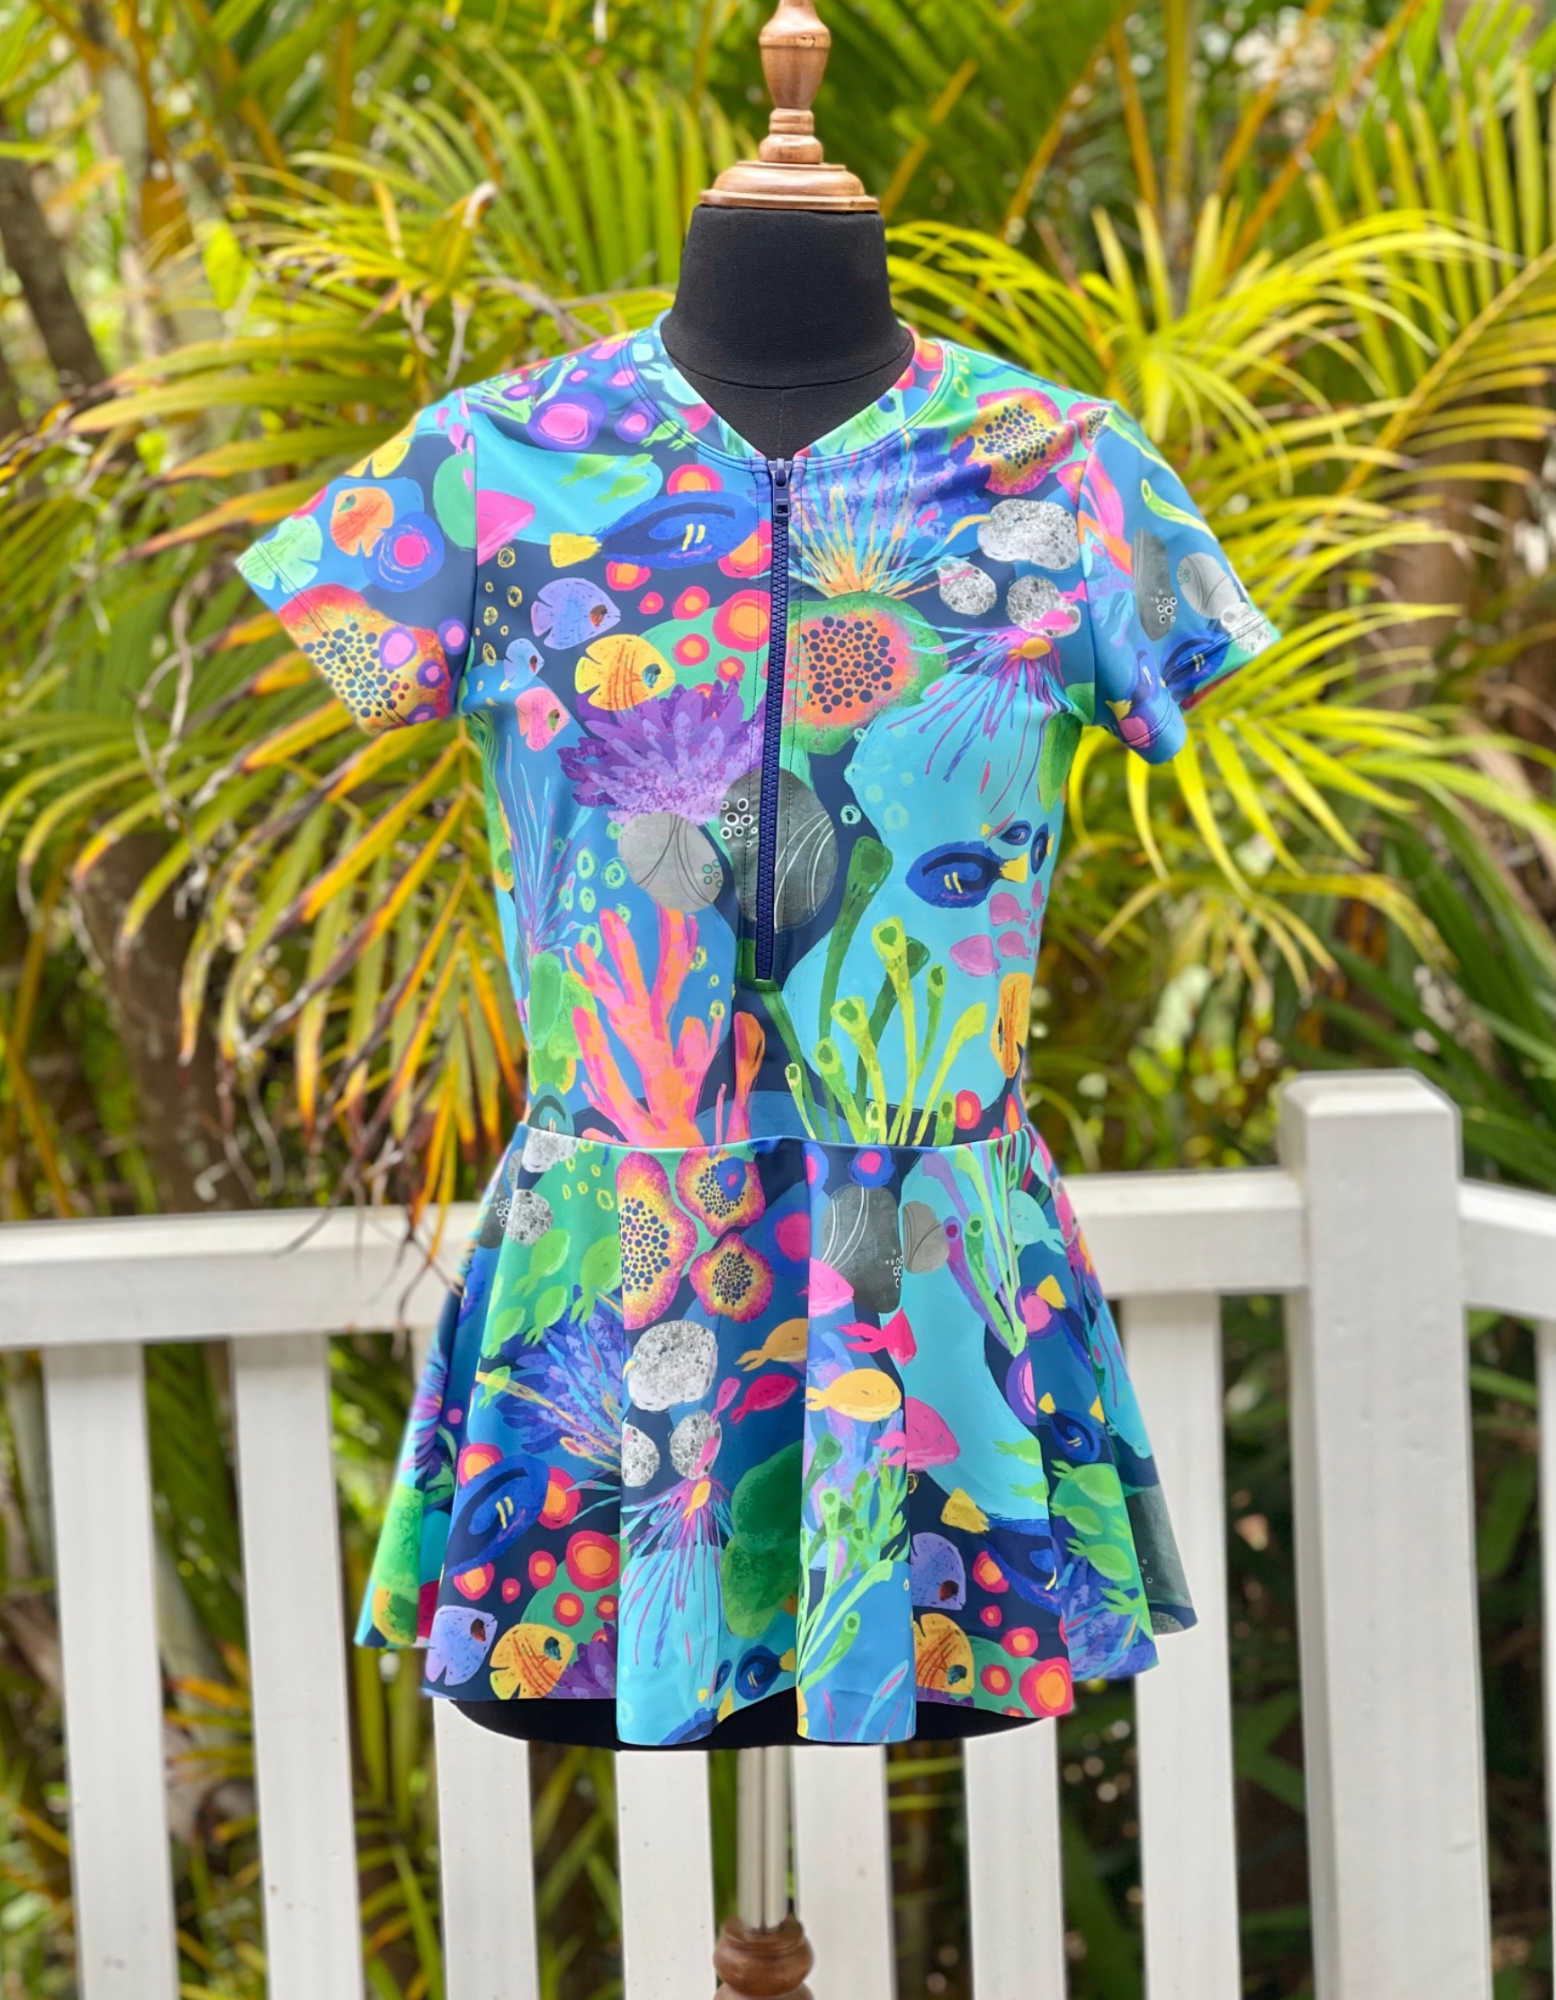 Reef small scale - One only size L- Women’s Short Sleeve Peplum Rashie